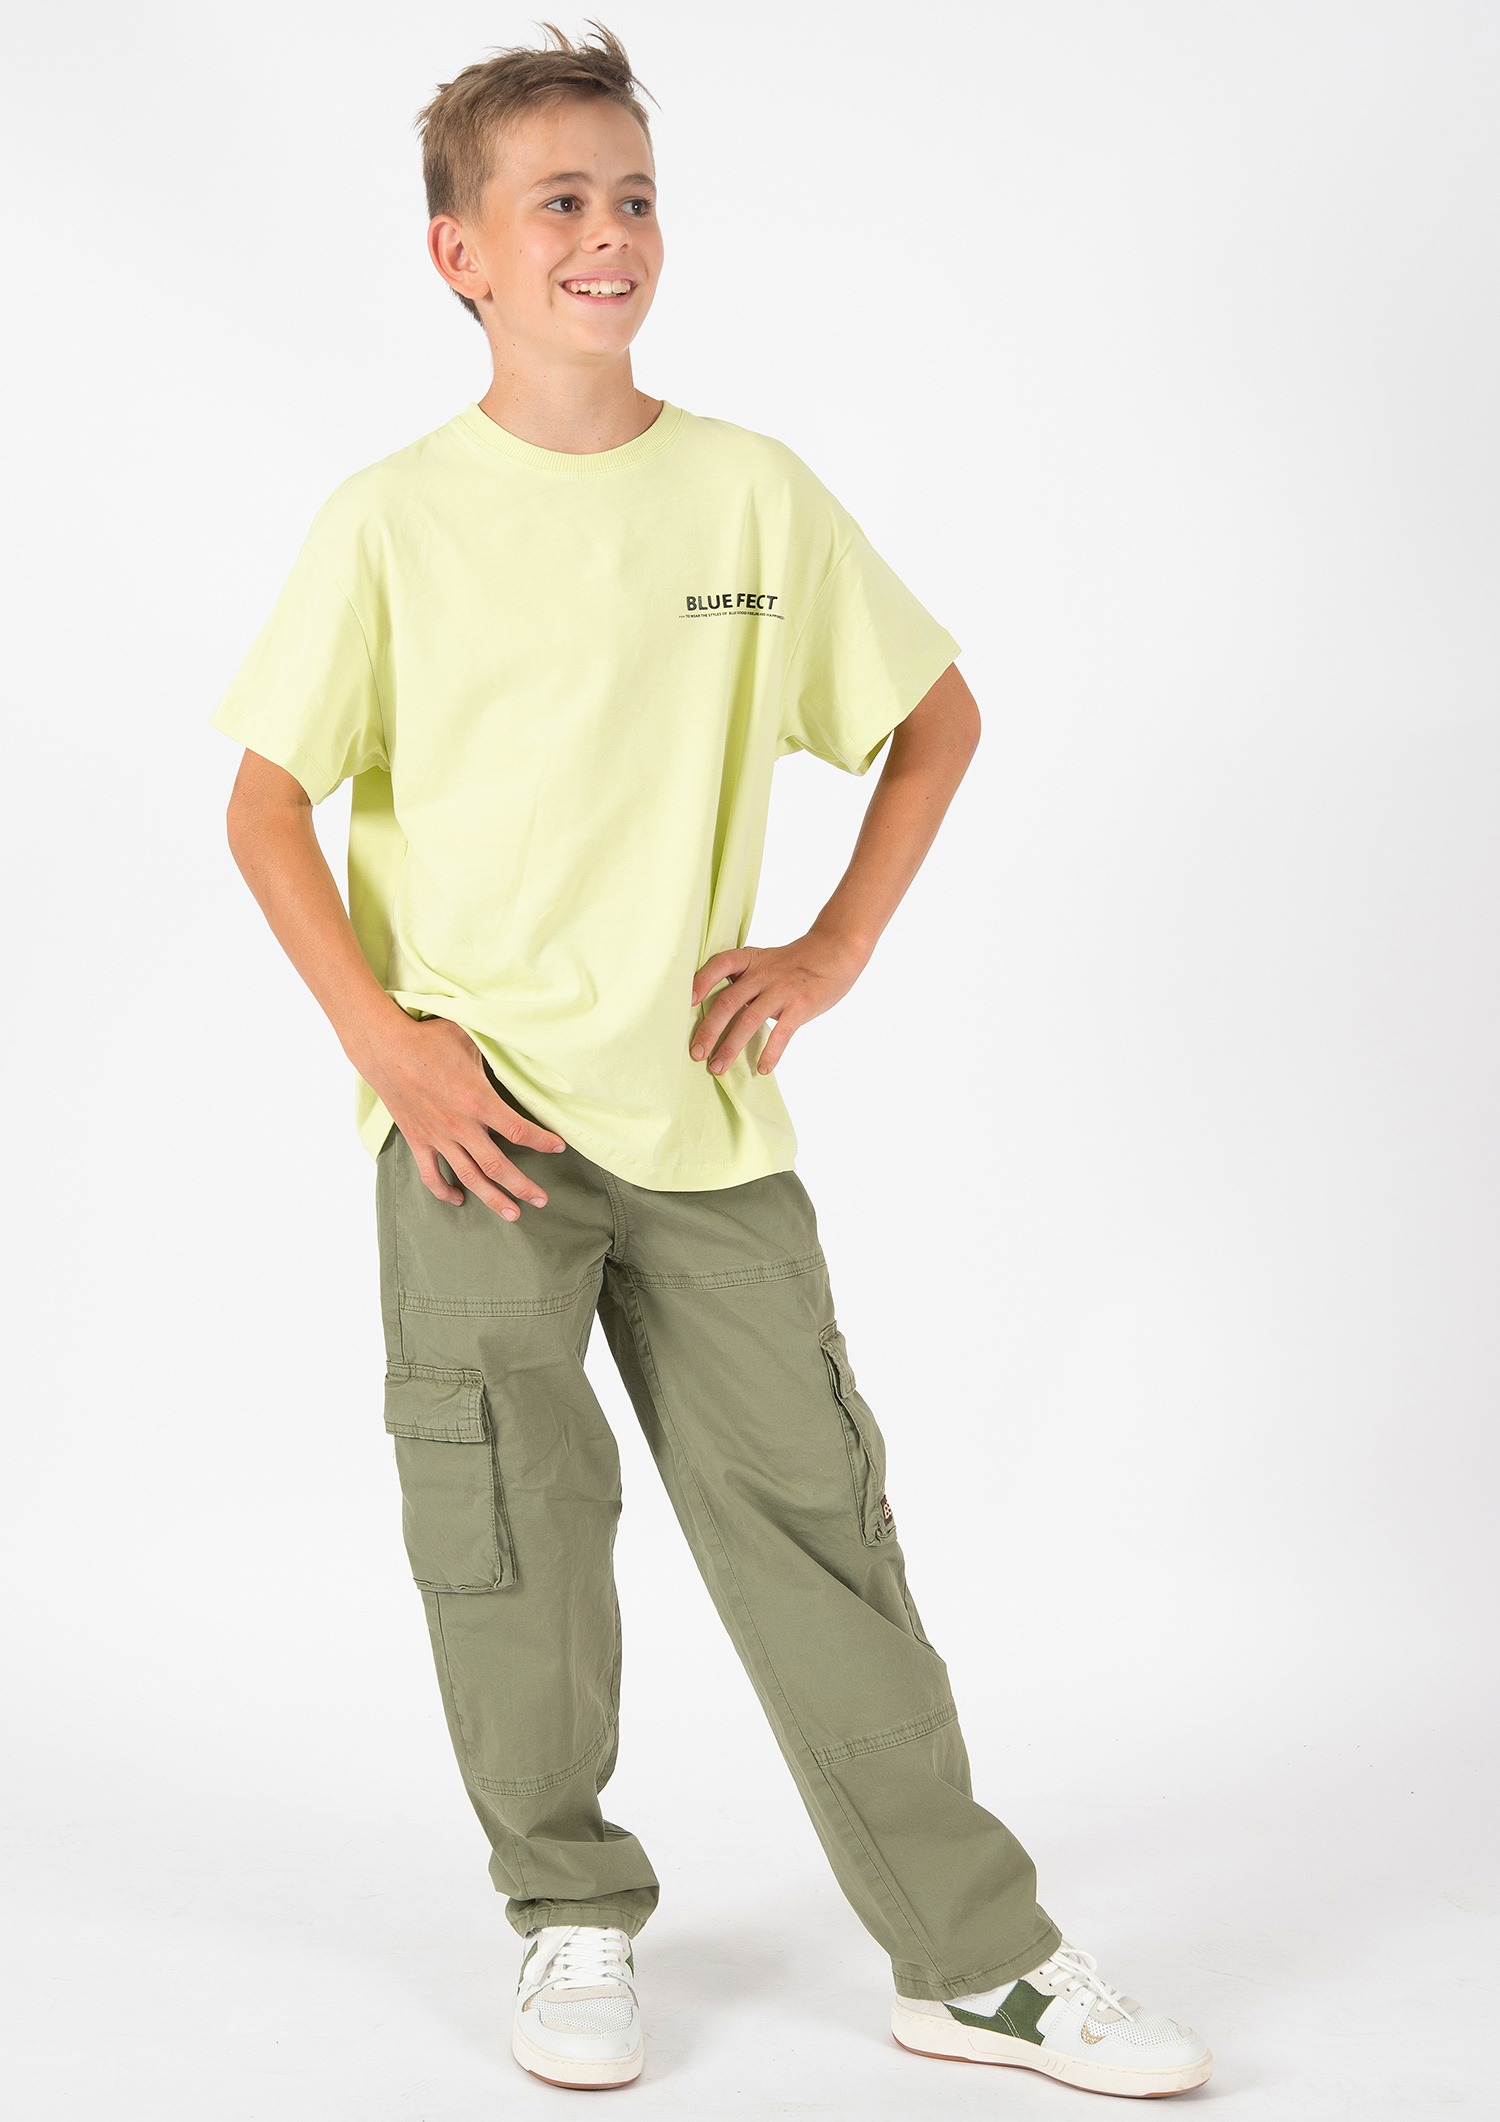 2861-Boys Super Baggy Pant available in slim, normal